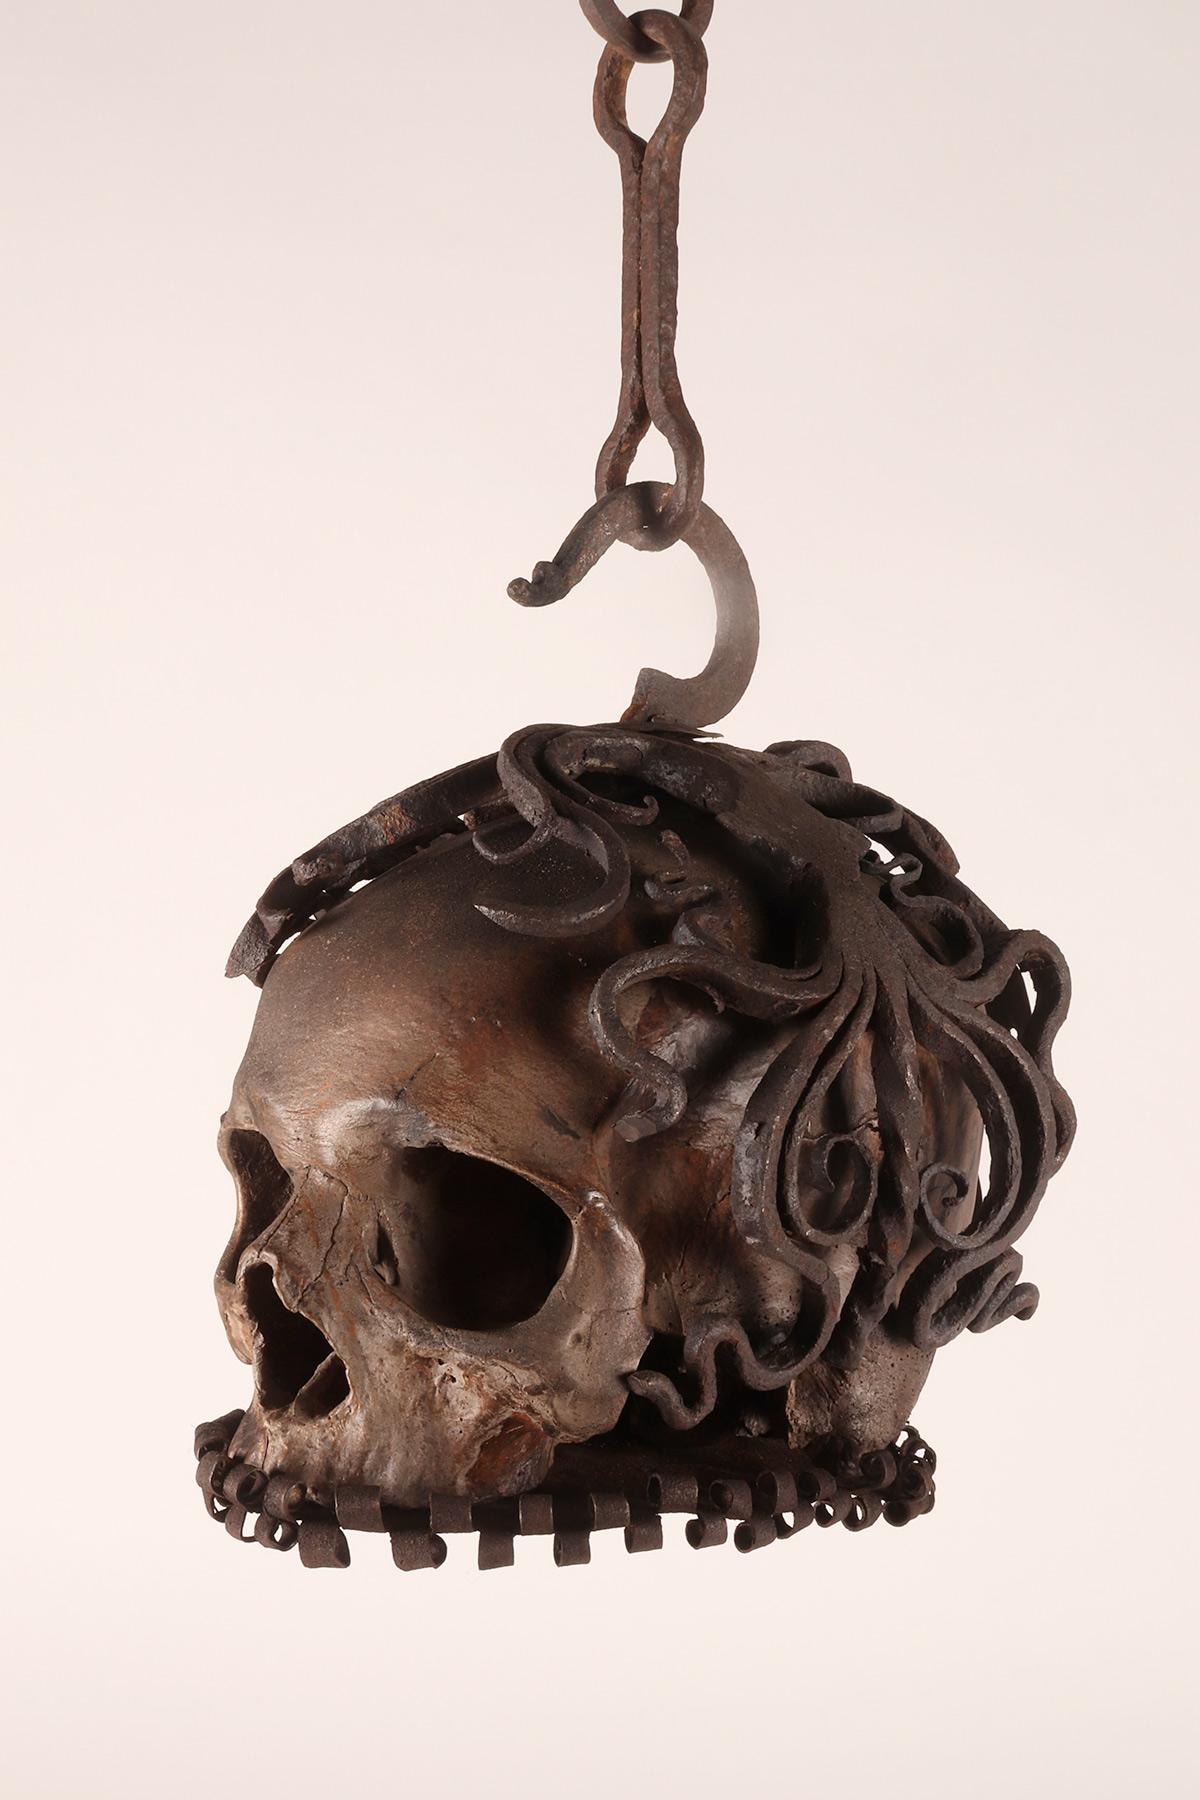 Iron Memento mori. A caged and suspended skull sculpture, Germany, late 17th century.